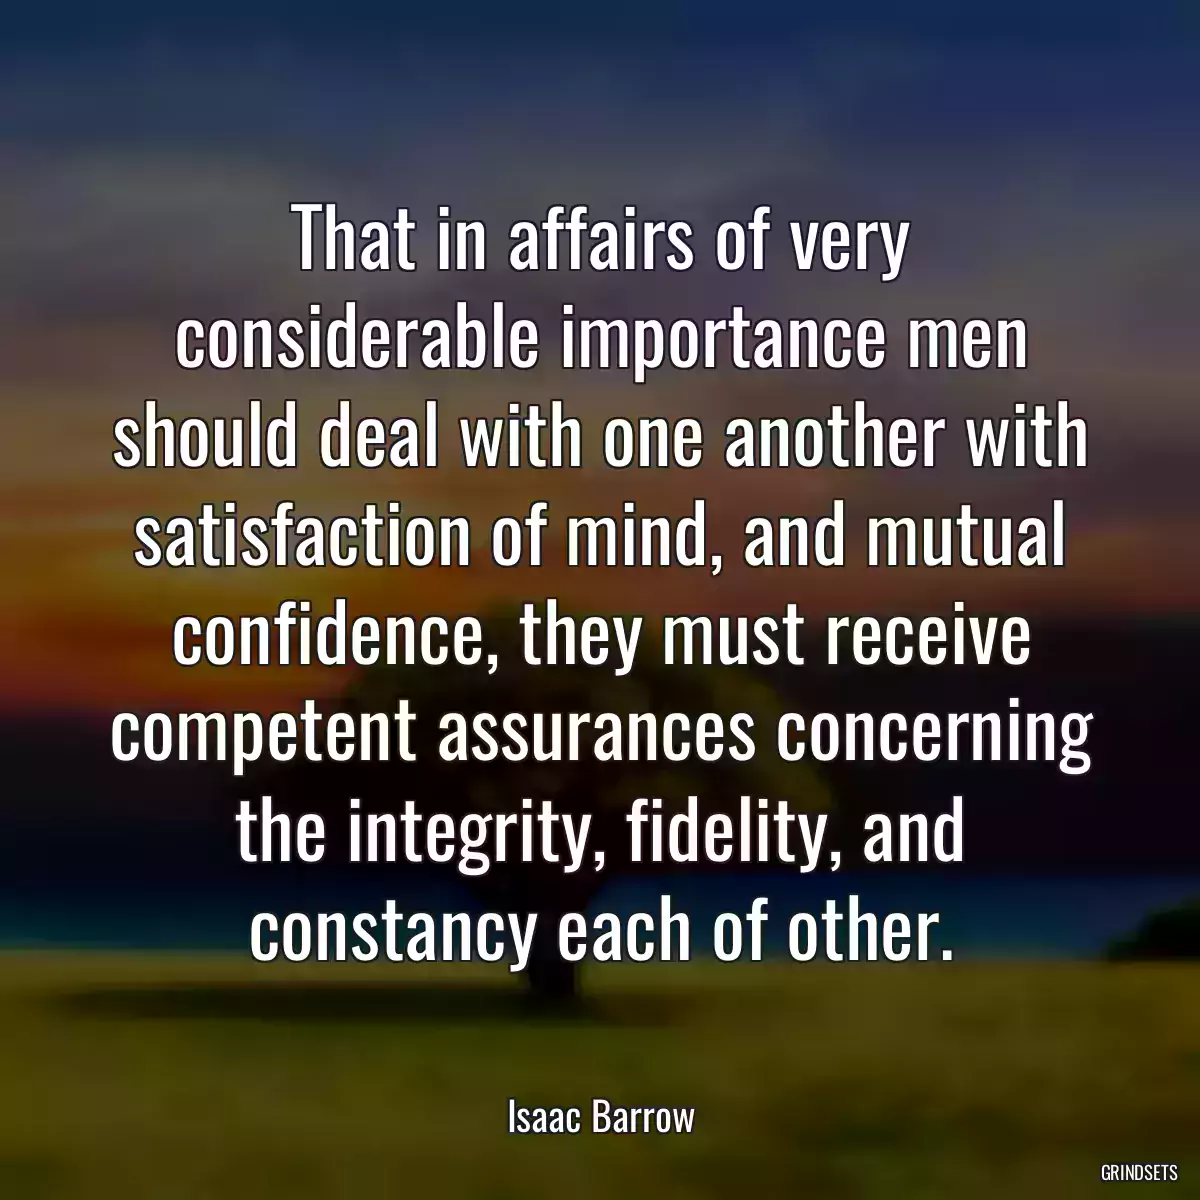 That in affairs of very considerable importance men should deal with one another with satisfaction of mind, and mutual confidence, they must receive competent assurances concerning the integrity, fidelity, and constancy each of other.